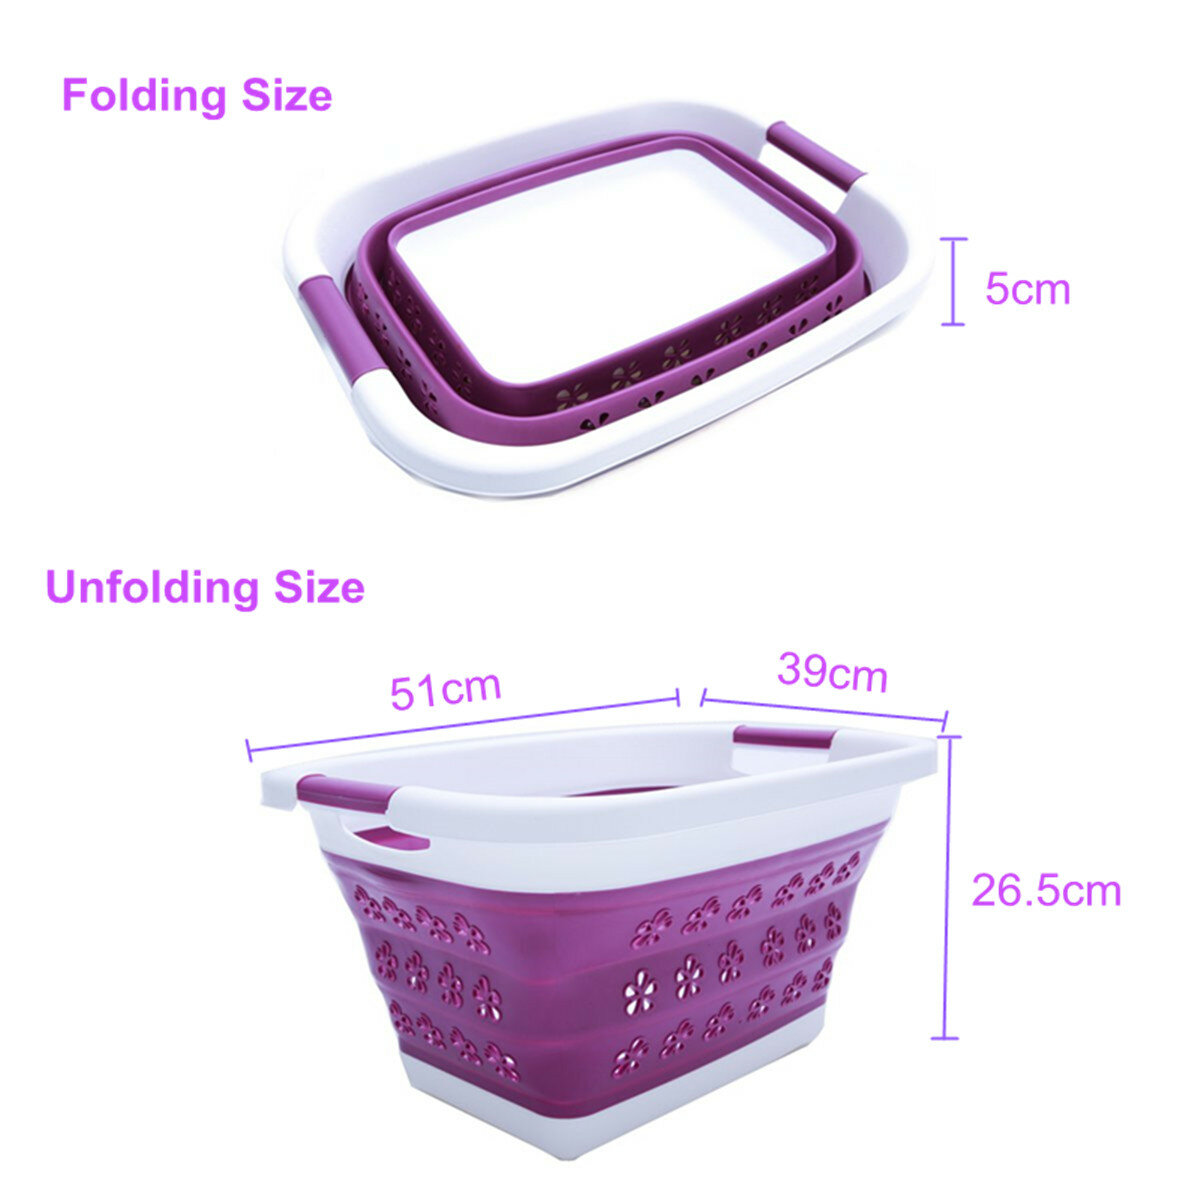 Large Collapsible Foldable Pop Up Laundry Basket Washing Cloth Space Saving Bin 